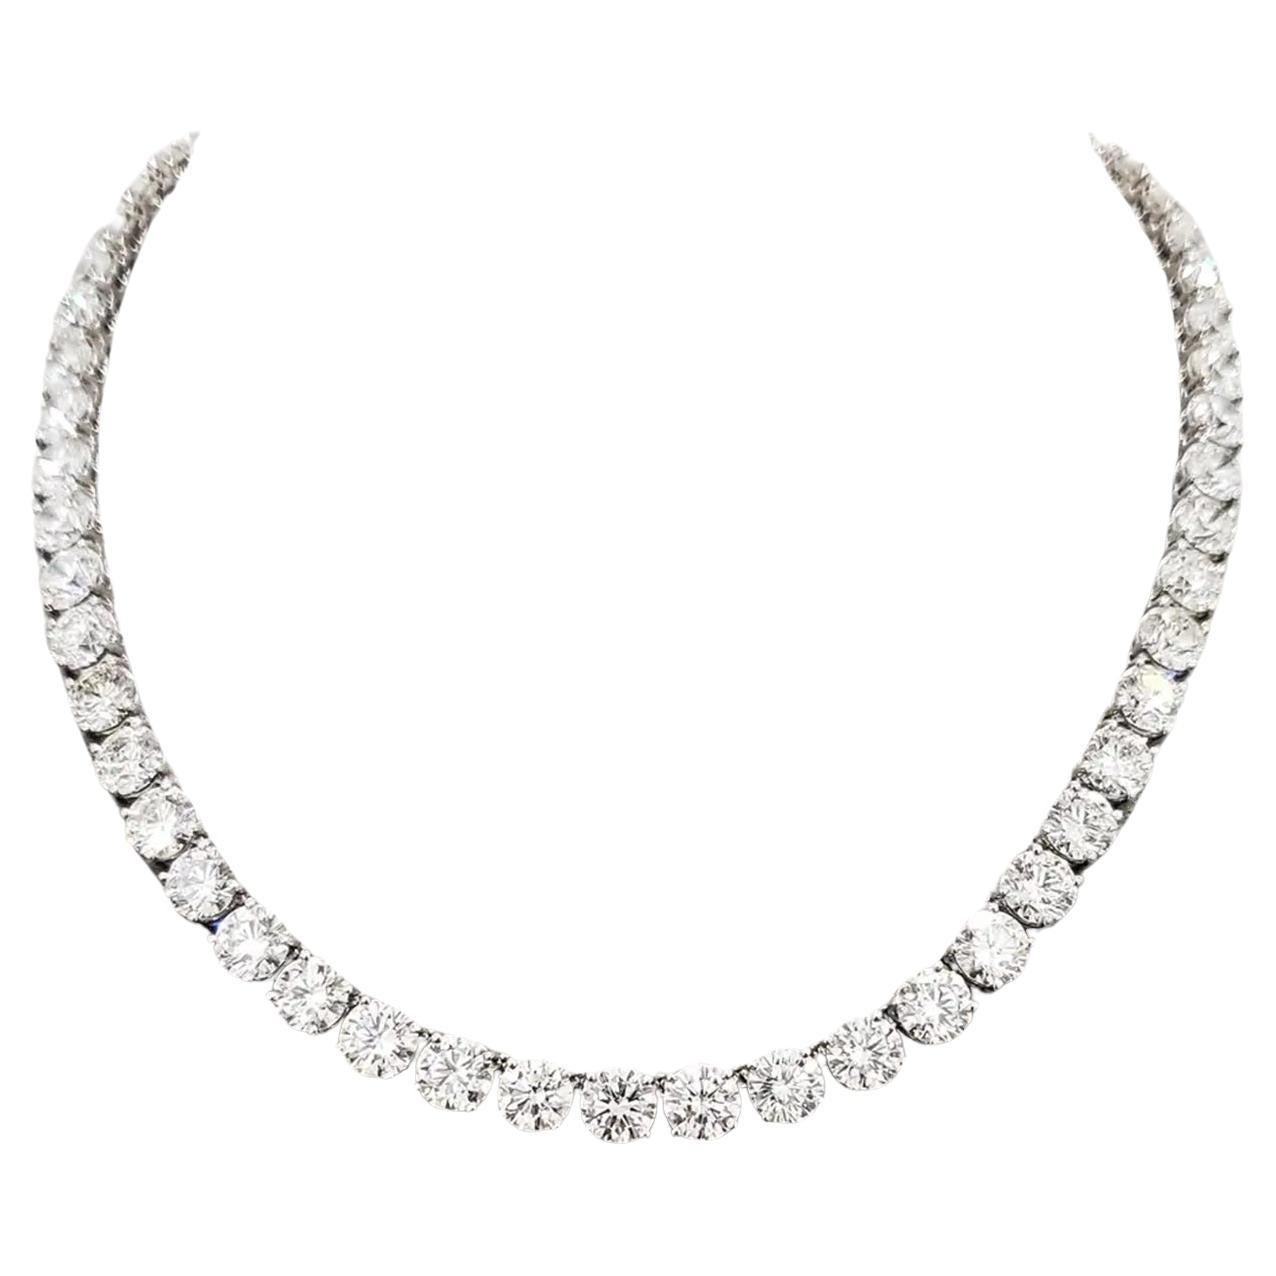 53 Carat Natural Untreated Diamond Tennis Necklace  For Sale